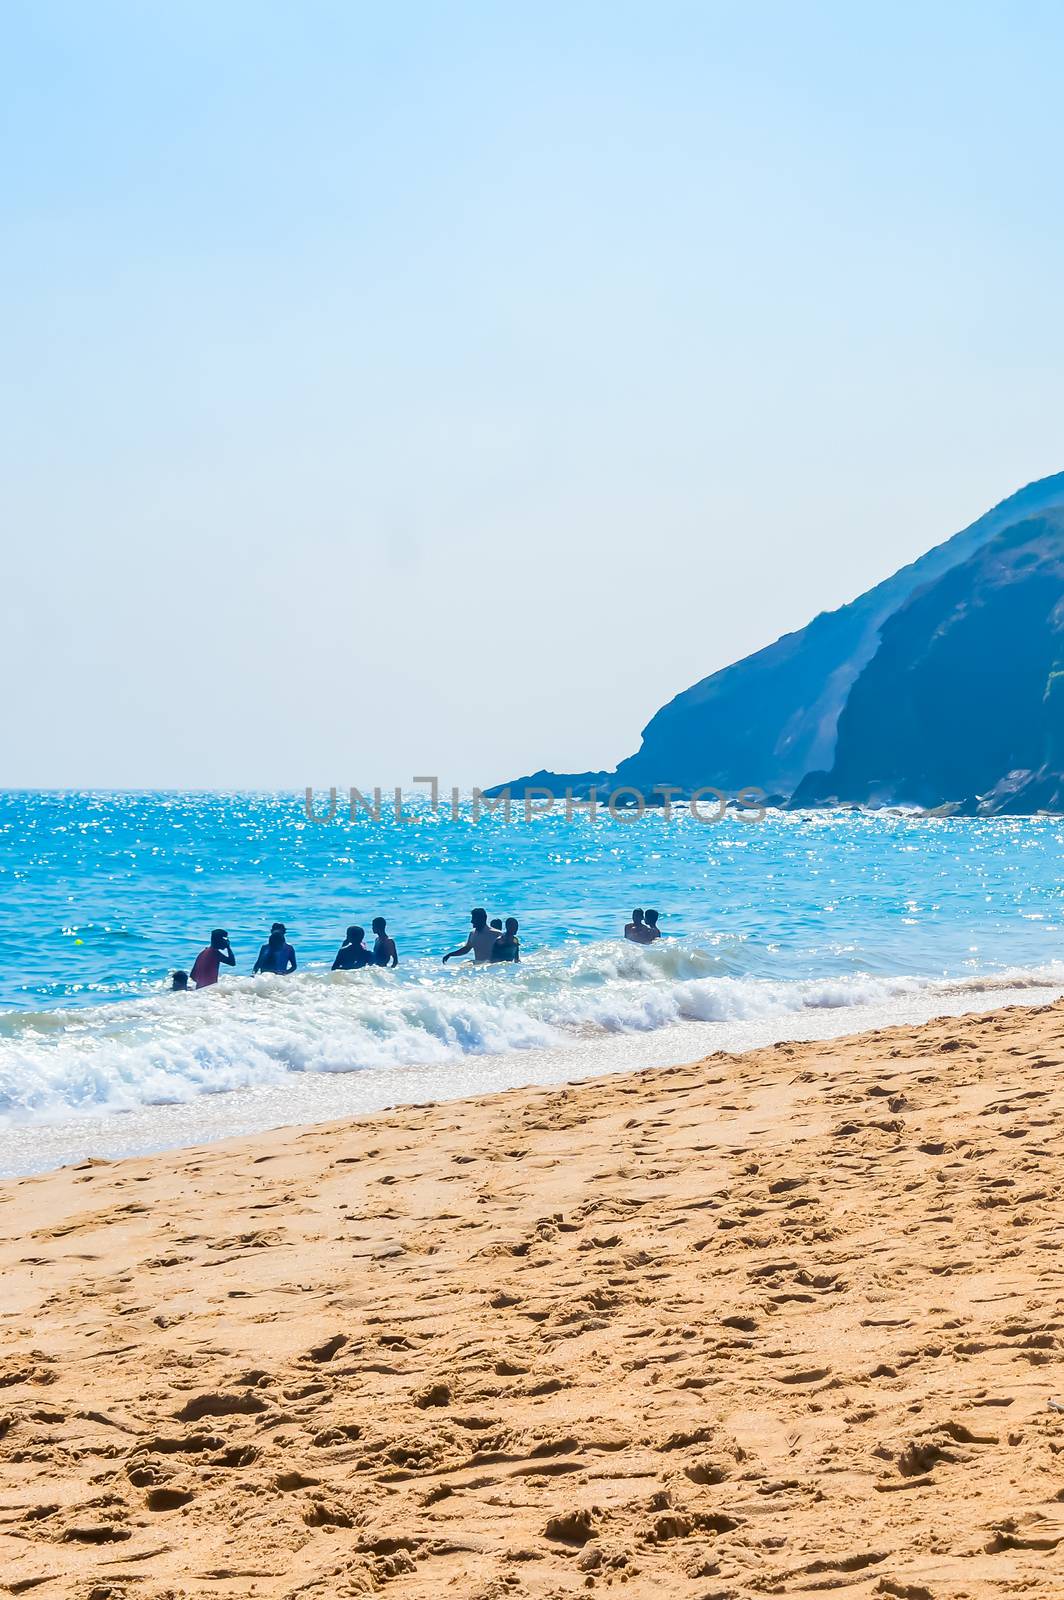 Photograph of Goa Sea Beach taken in Christmas Holiday during New Year celebration in landscape style Use for background screen saver e-cards website banner usage Travel holiday new year celebration